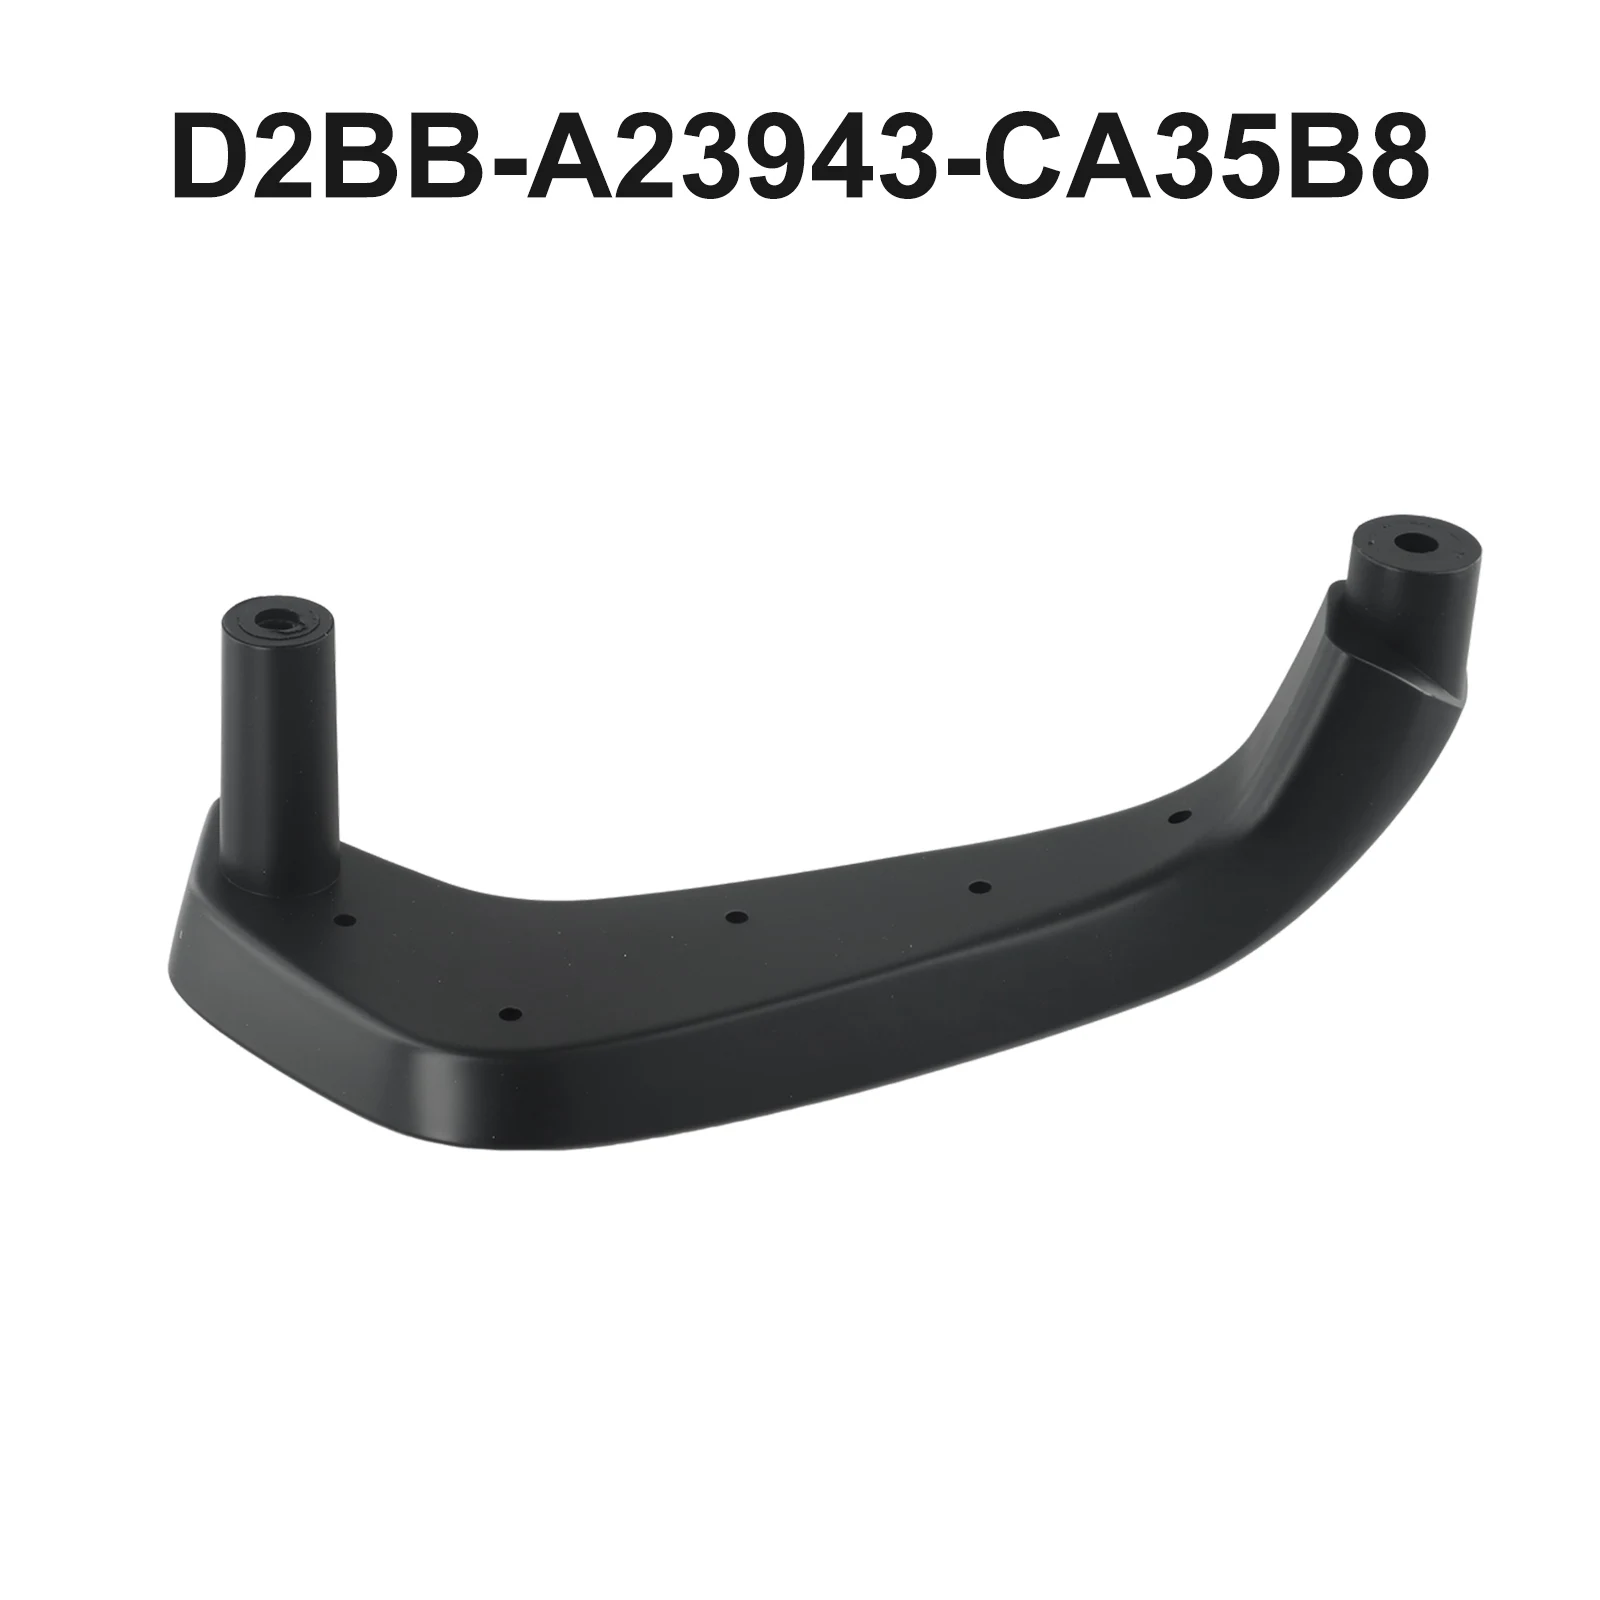 

Car Left Side Interior Door Pull Handle For Ford Fiesta 2011-2020 Manual Only D2BB-A23943-CA35B8 Automobiles Accessories